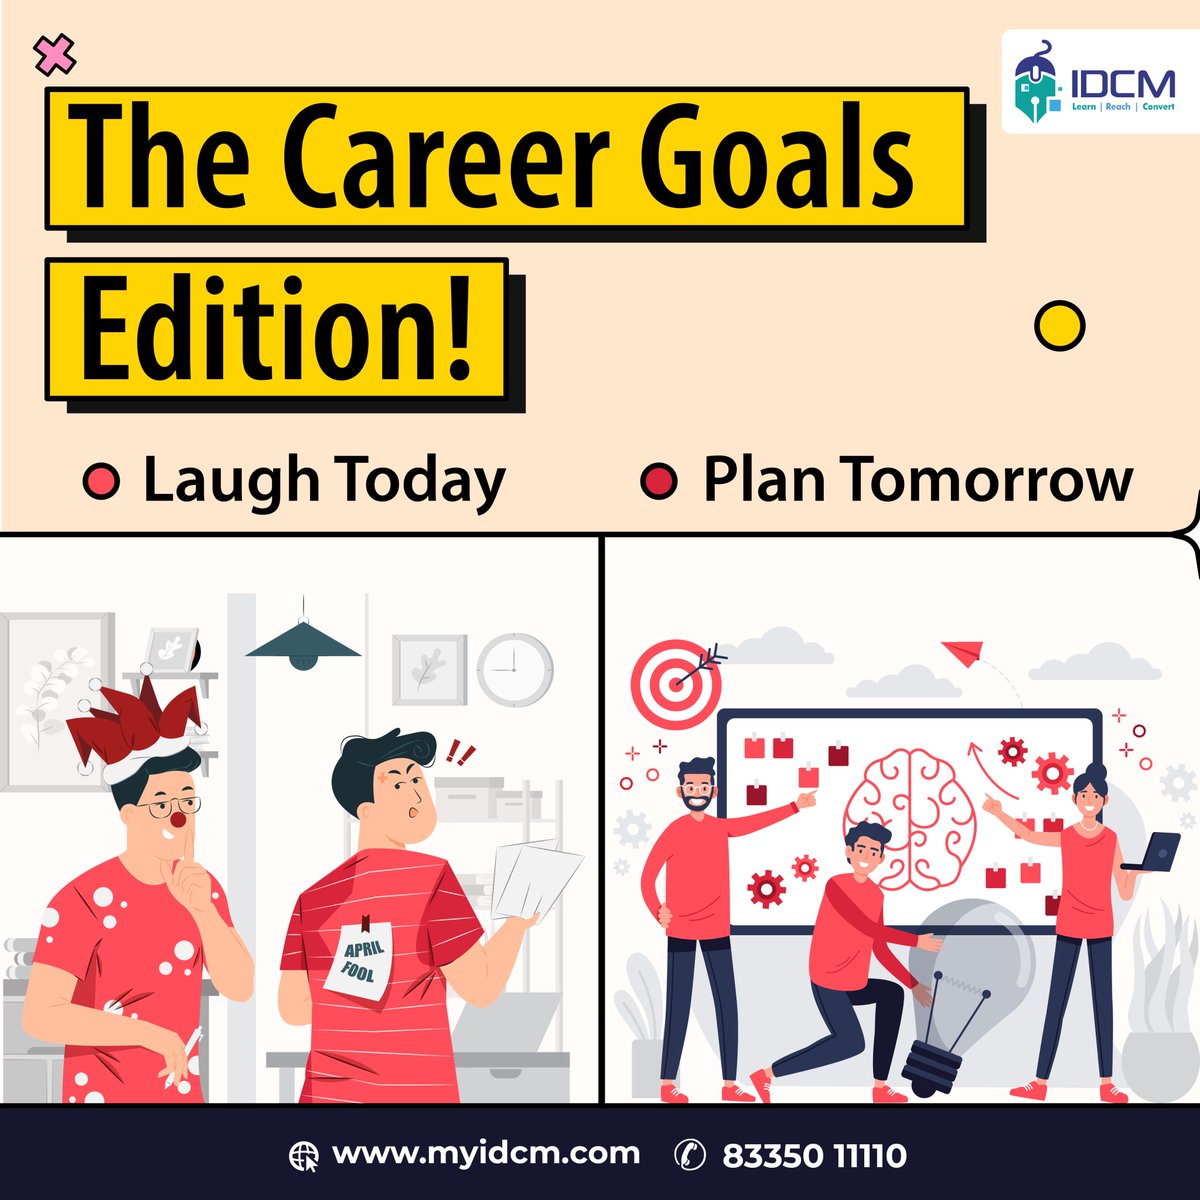 Enjoy April Fool's Day with laughter, but don't forget to plan for your career goals tomorrow! 🎯
#AprilFoolsDay

#myIDCM #LearnWithIDCM #DigitalMarketing #IAmDigitalReady #WinningStrokewithIDCM #careergrowth #careergoals #April #AprilFools #AprilFoolsDay #1stApril